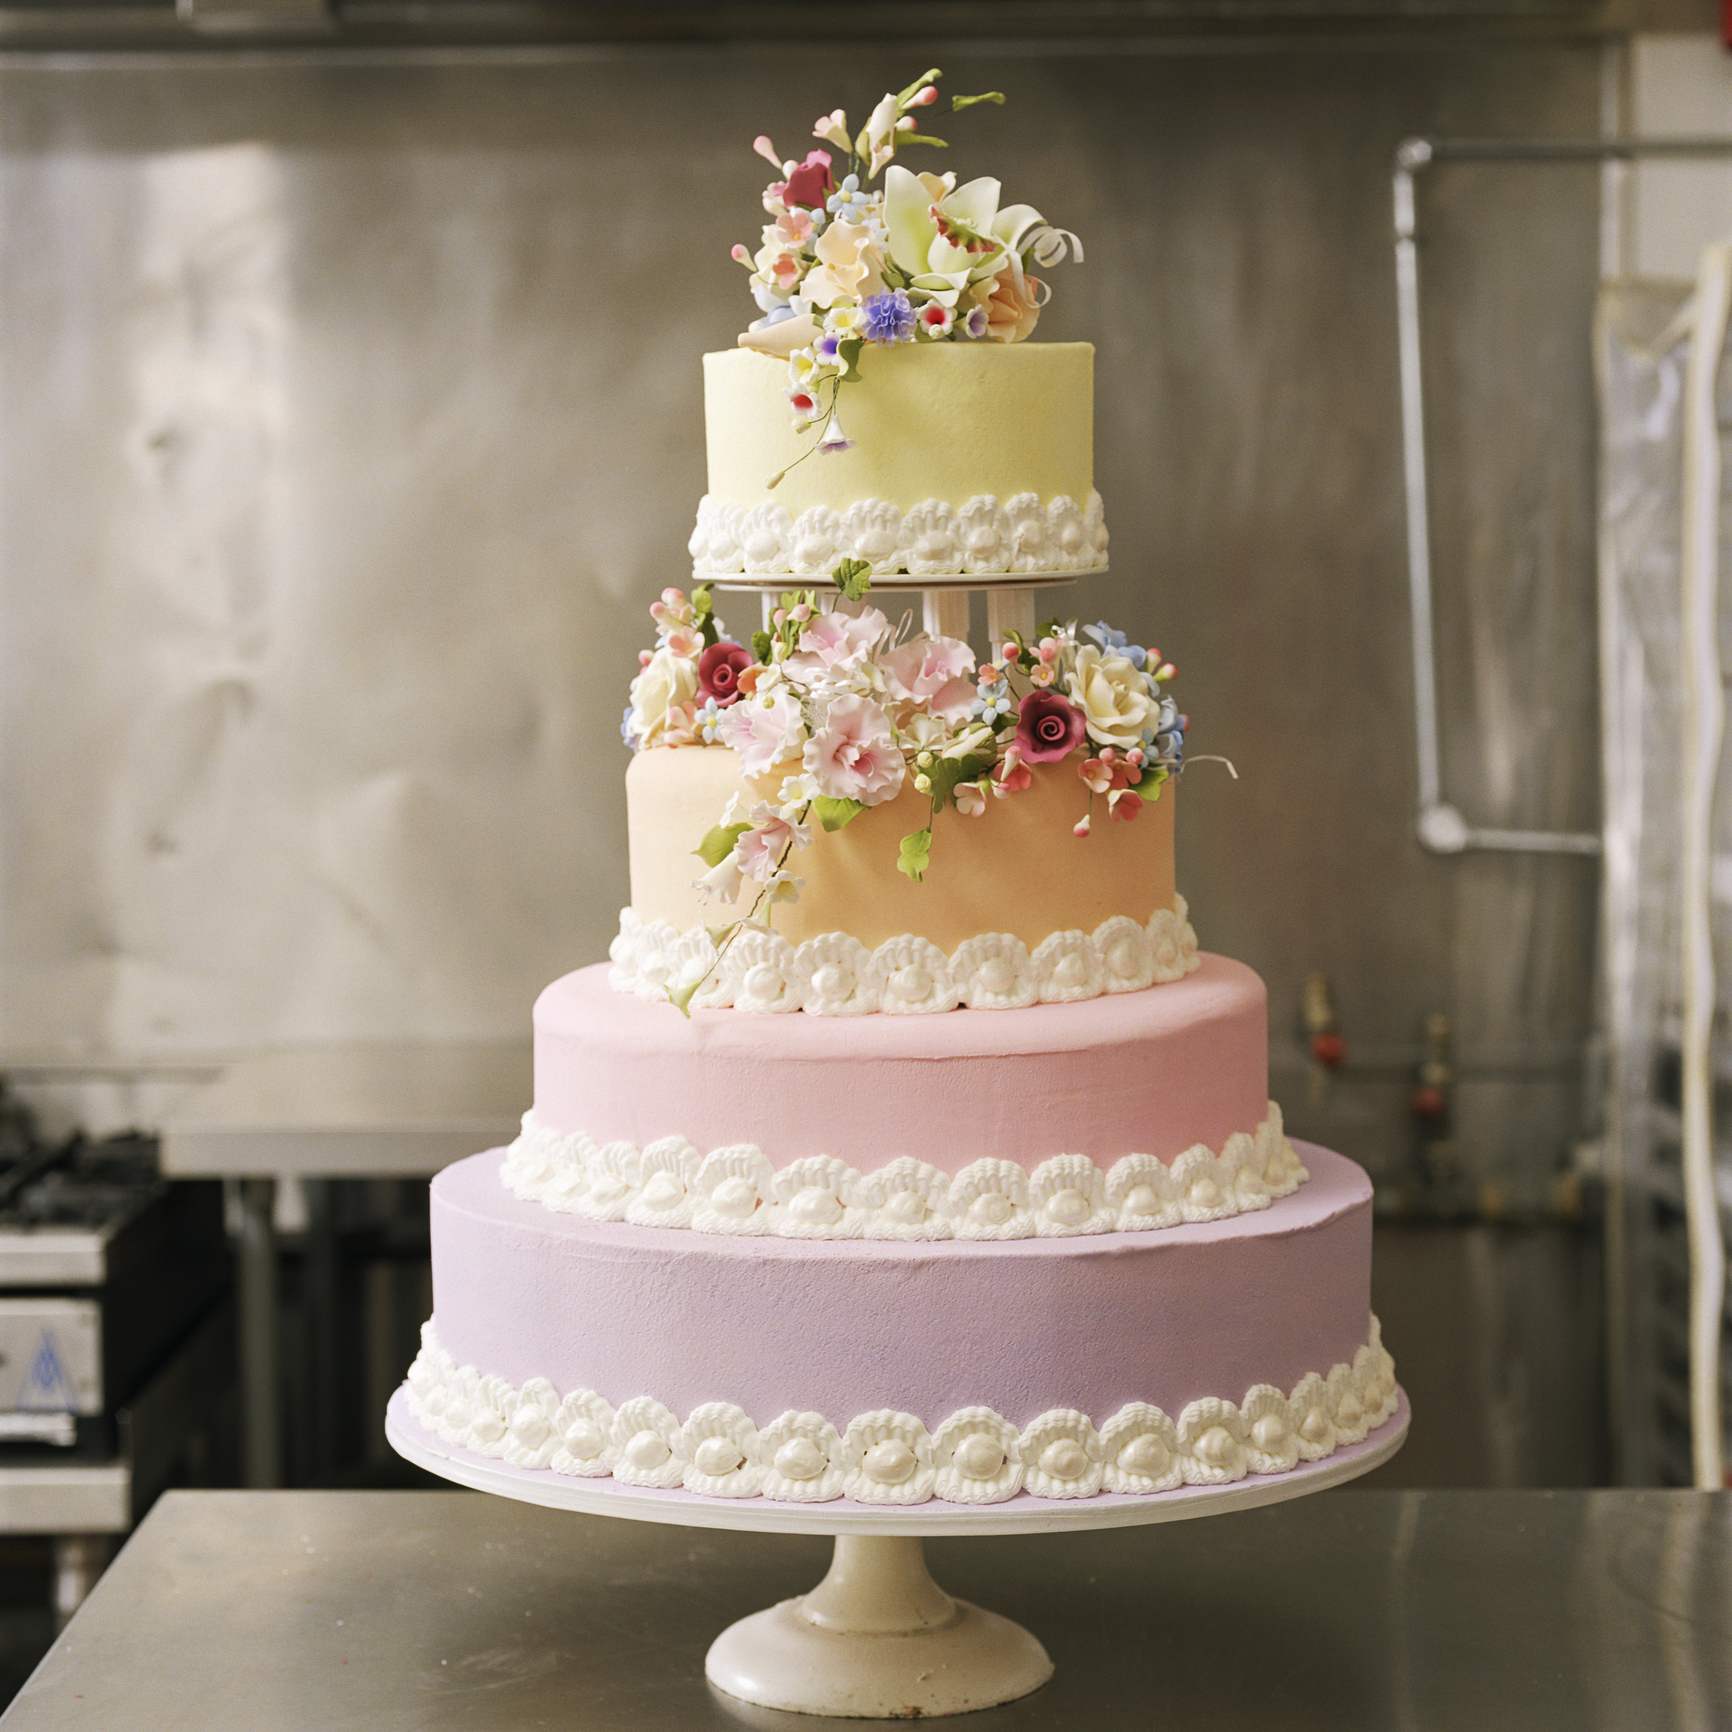 Four-tiered cake with floral decorations on a stand